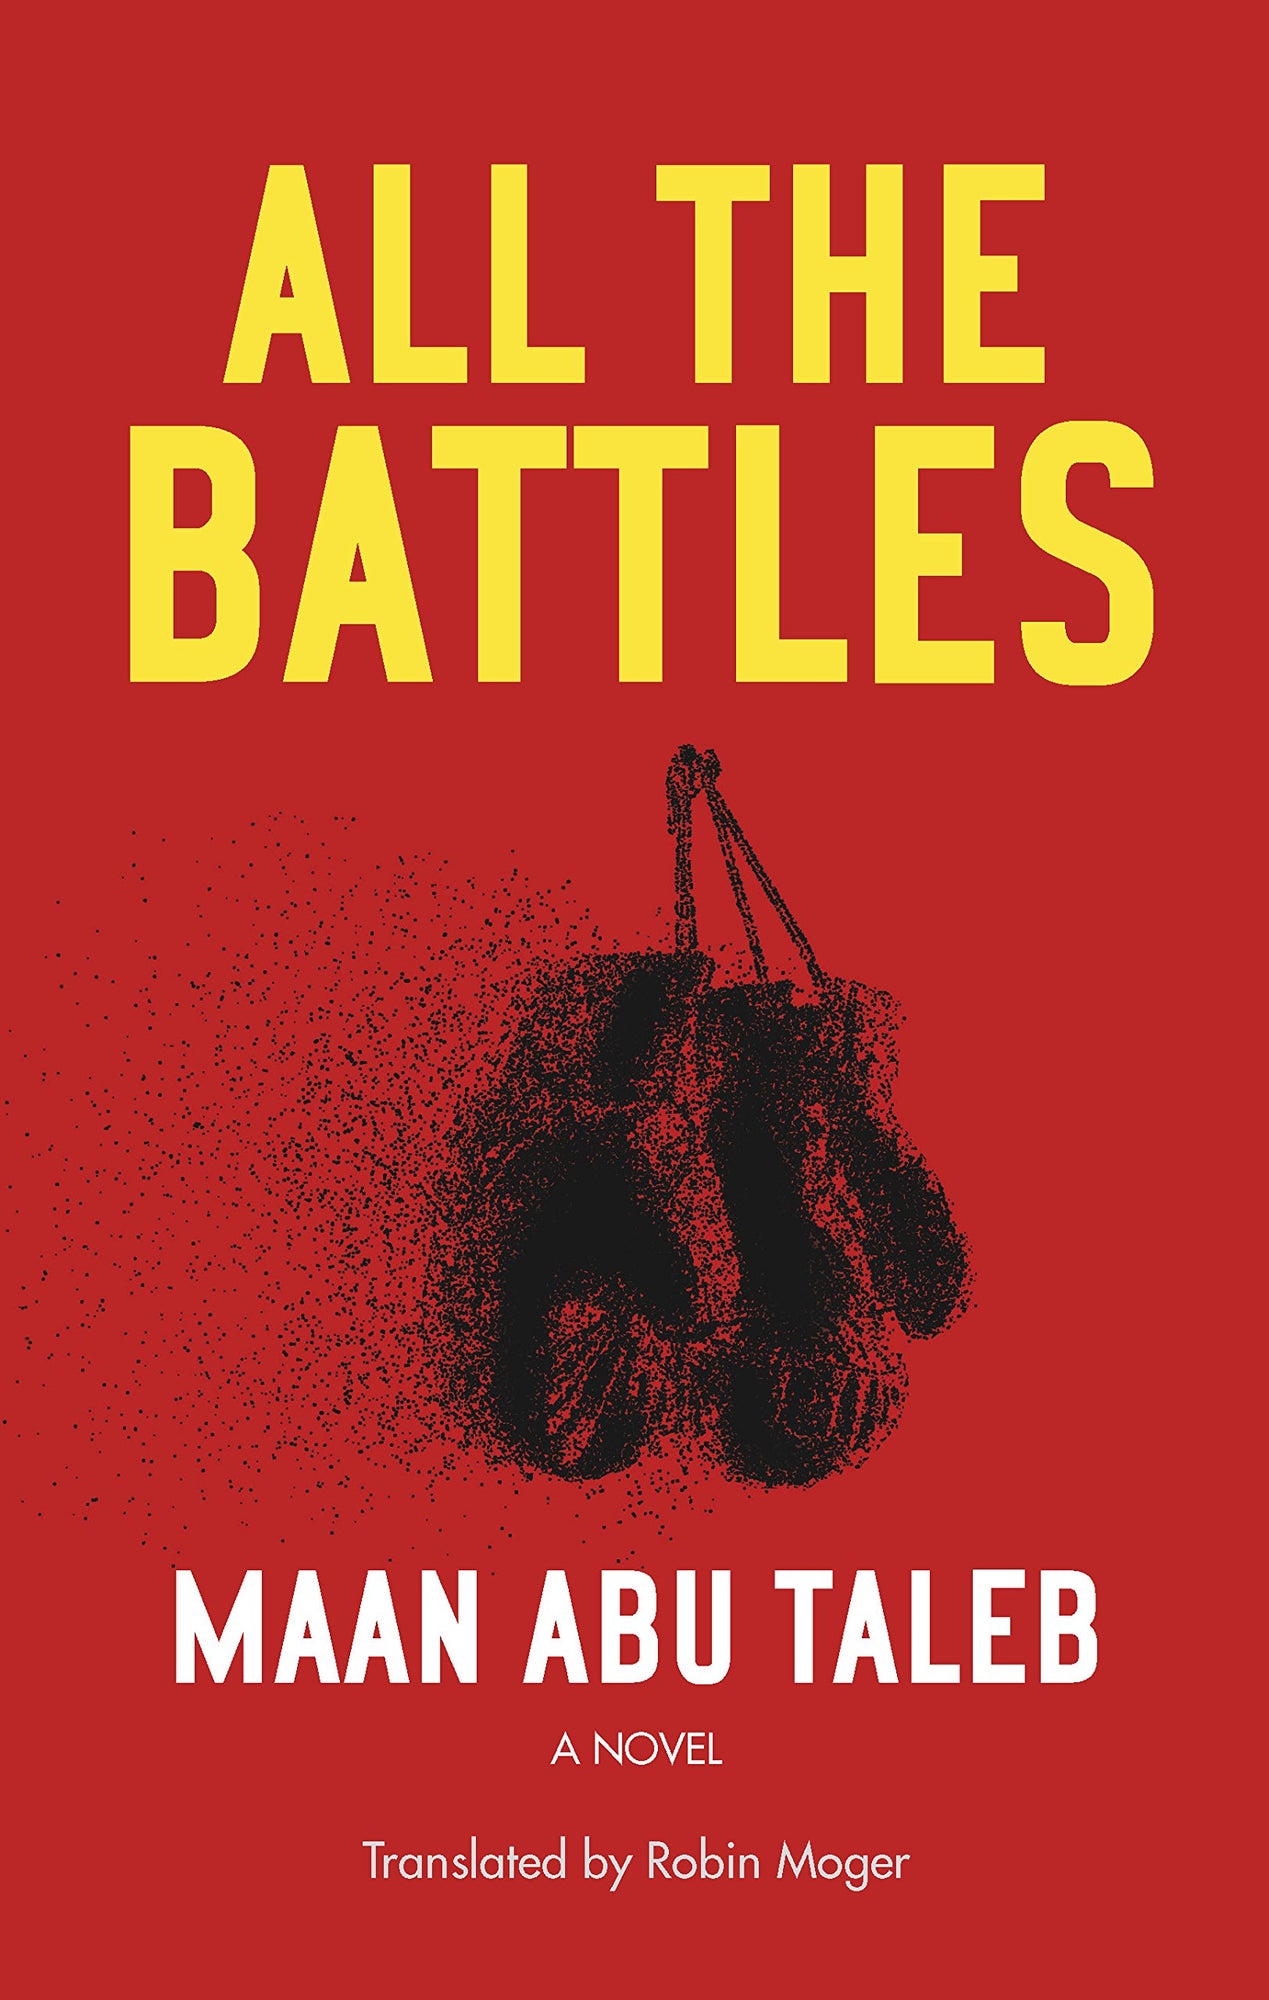 All the Battles in yellow sans serif type and Maan Abu Taleb in white sans serif type with a red backdrop and graphic of boxing gloves